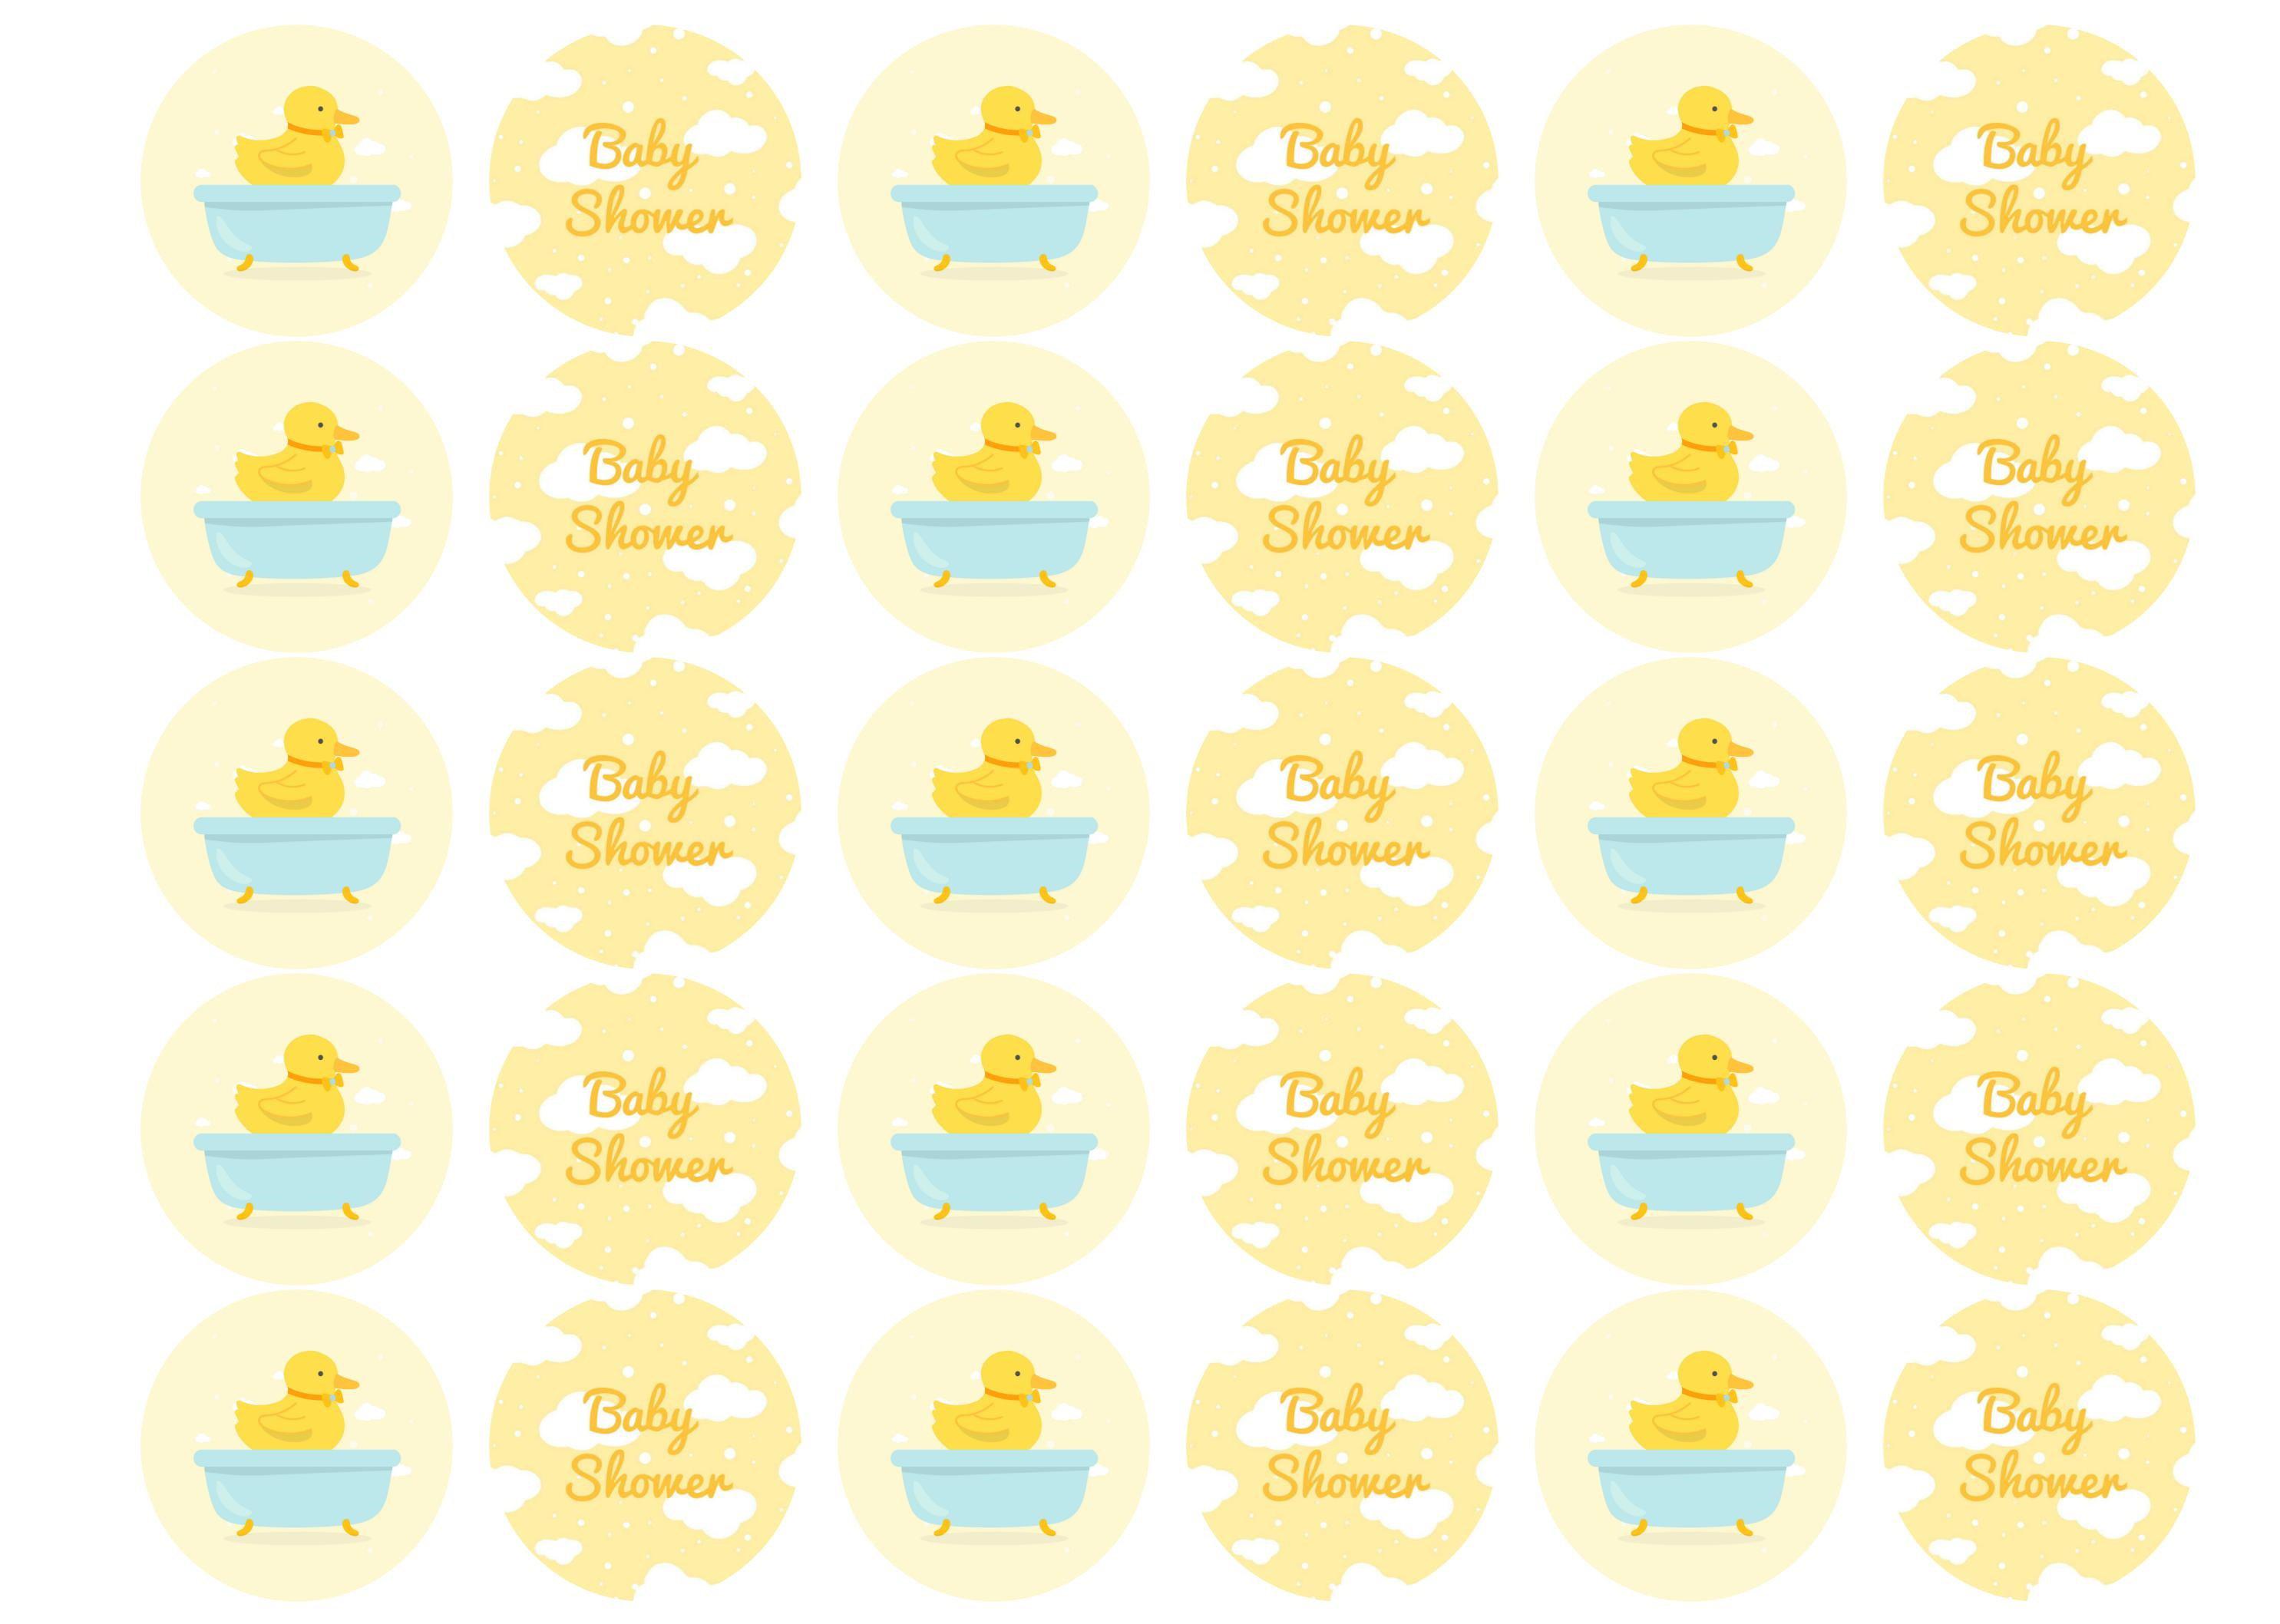 Edible cake toppers, Baby Shower - Yellow Chick